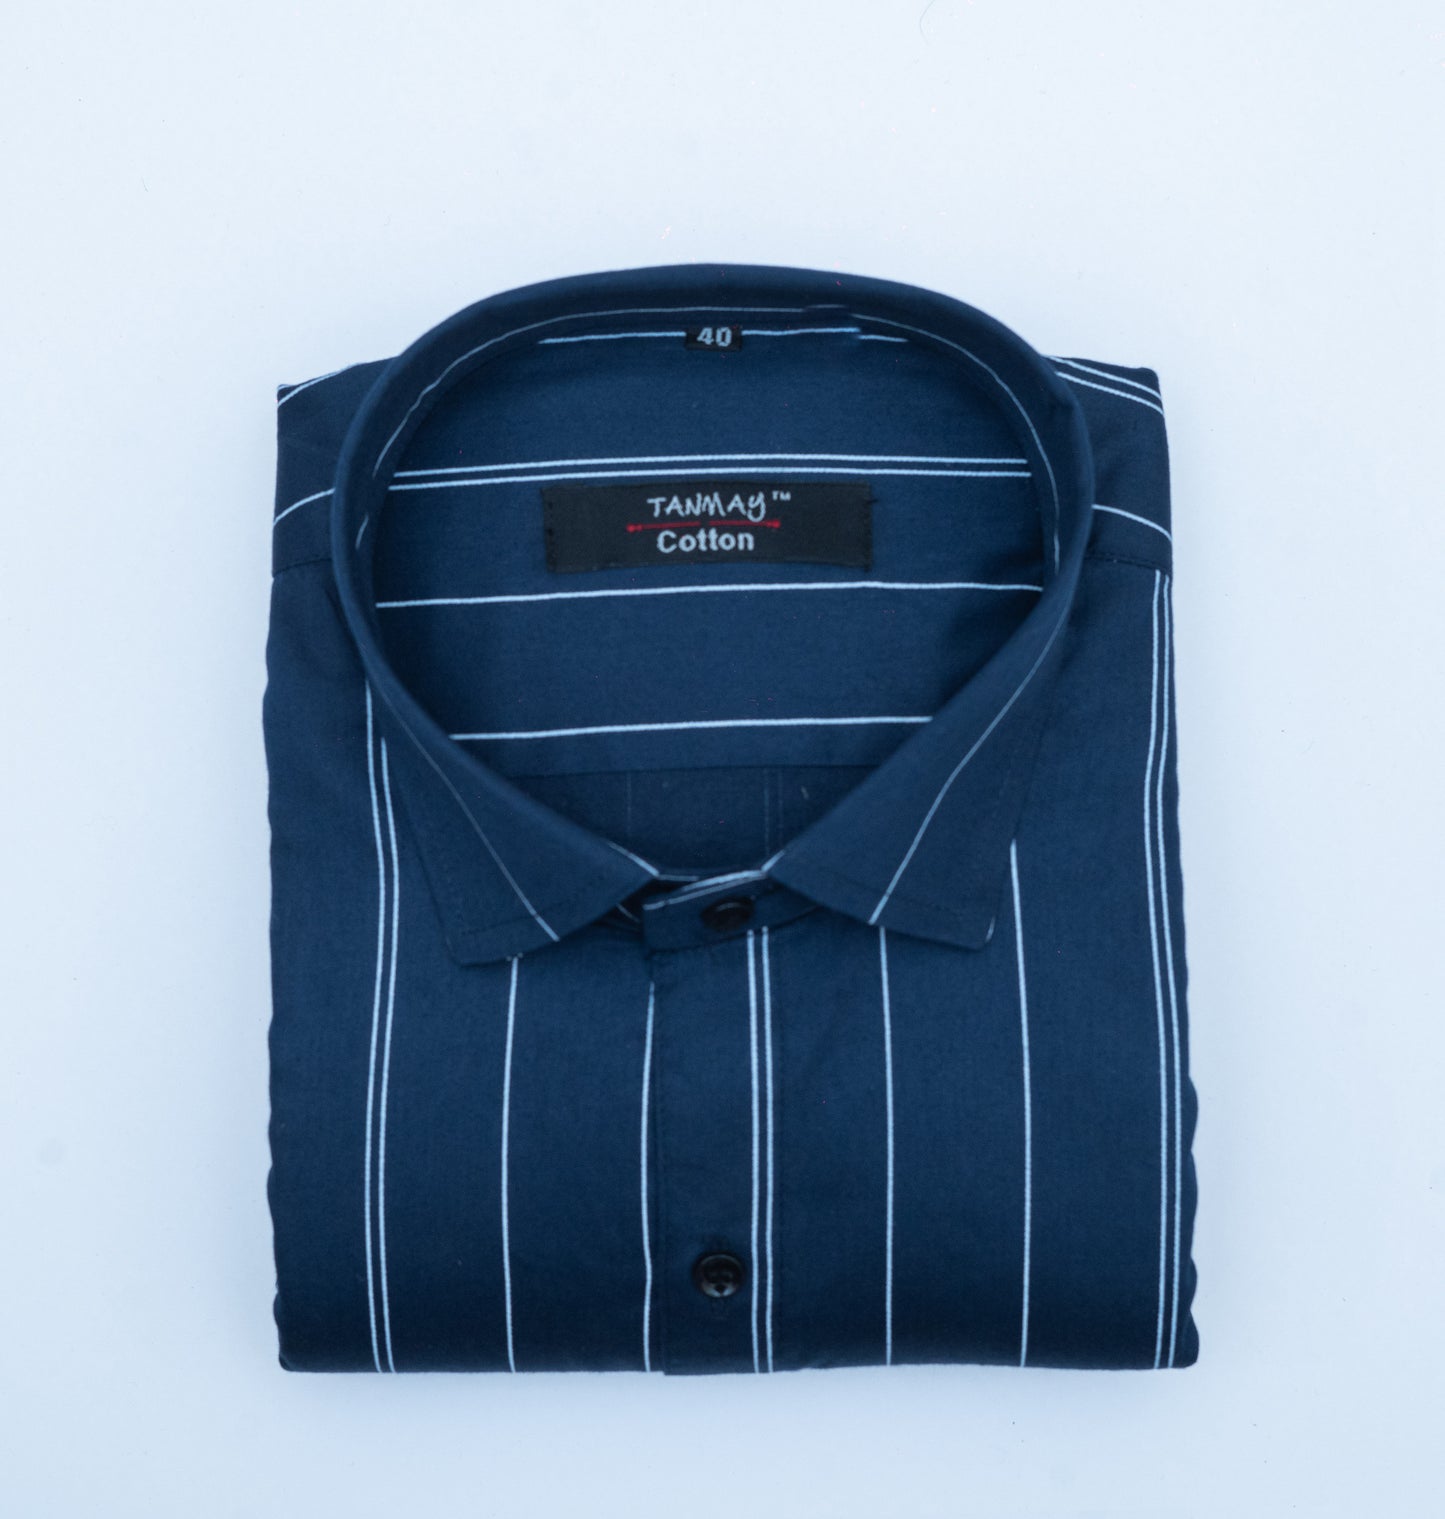 Navy Blue Color 100% Lining Cotton Shirt For Men's